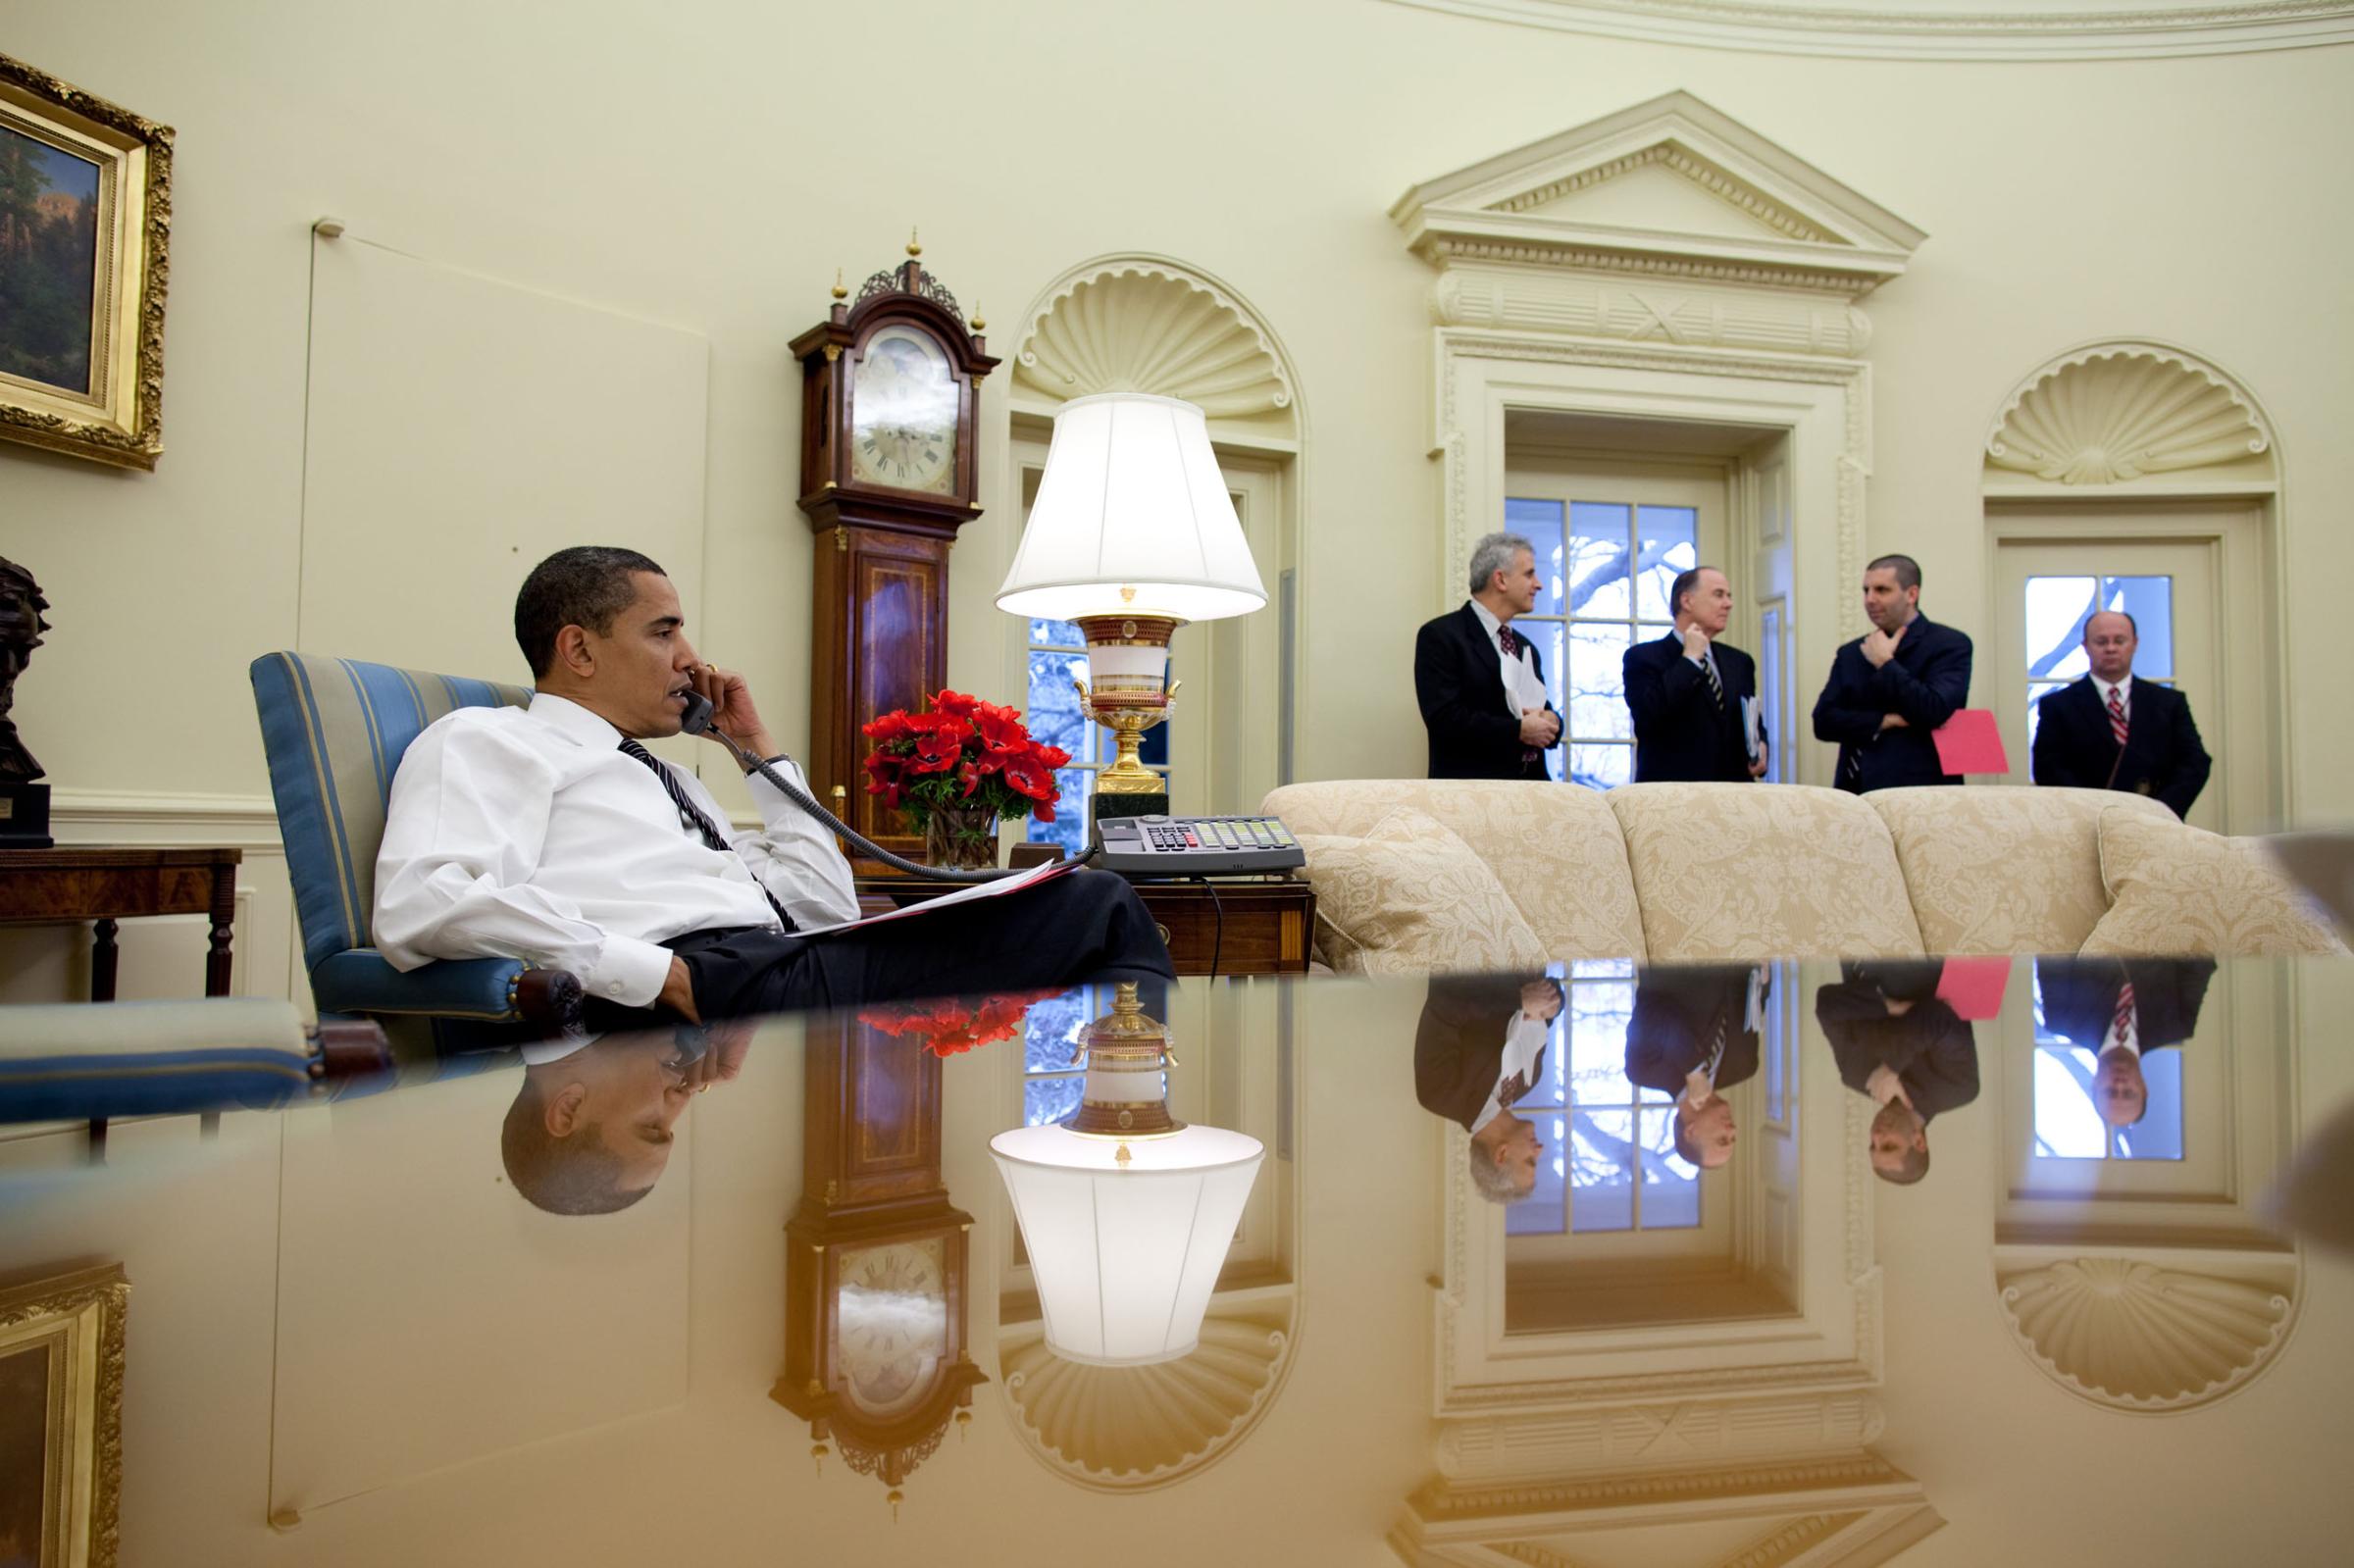 President Barack Obama calls foreign leaders in the Oval Office of the White House, on Jan. 26, 2009.